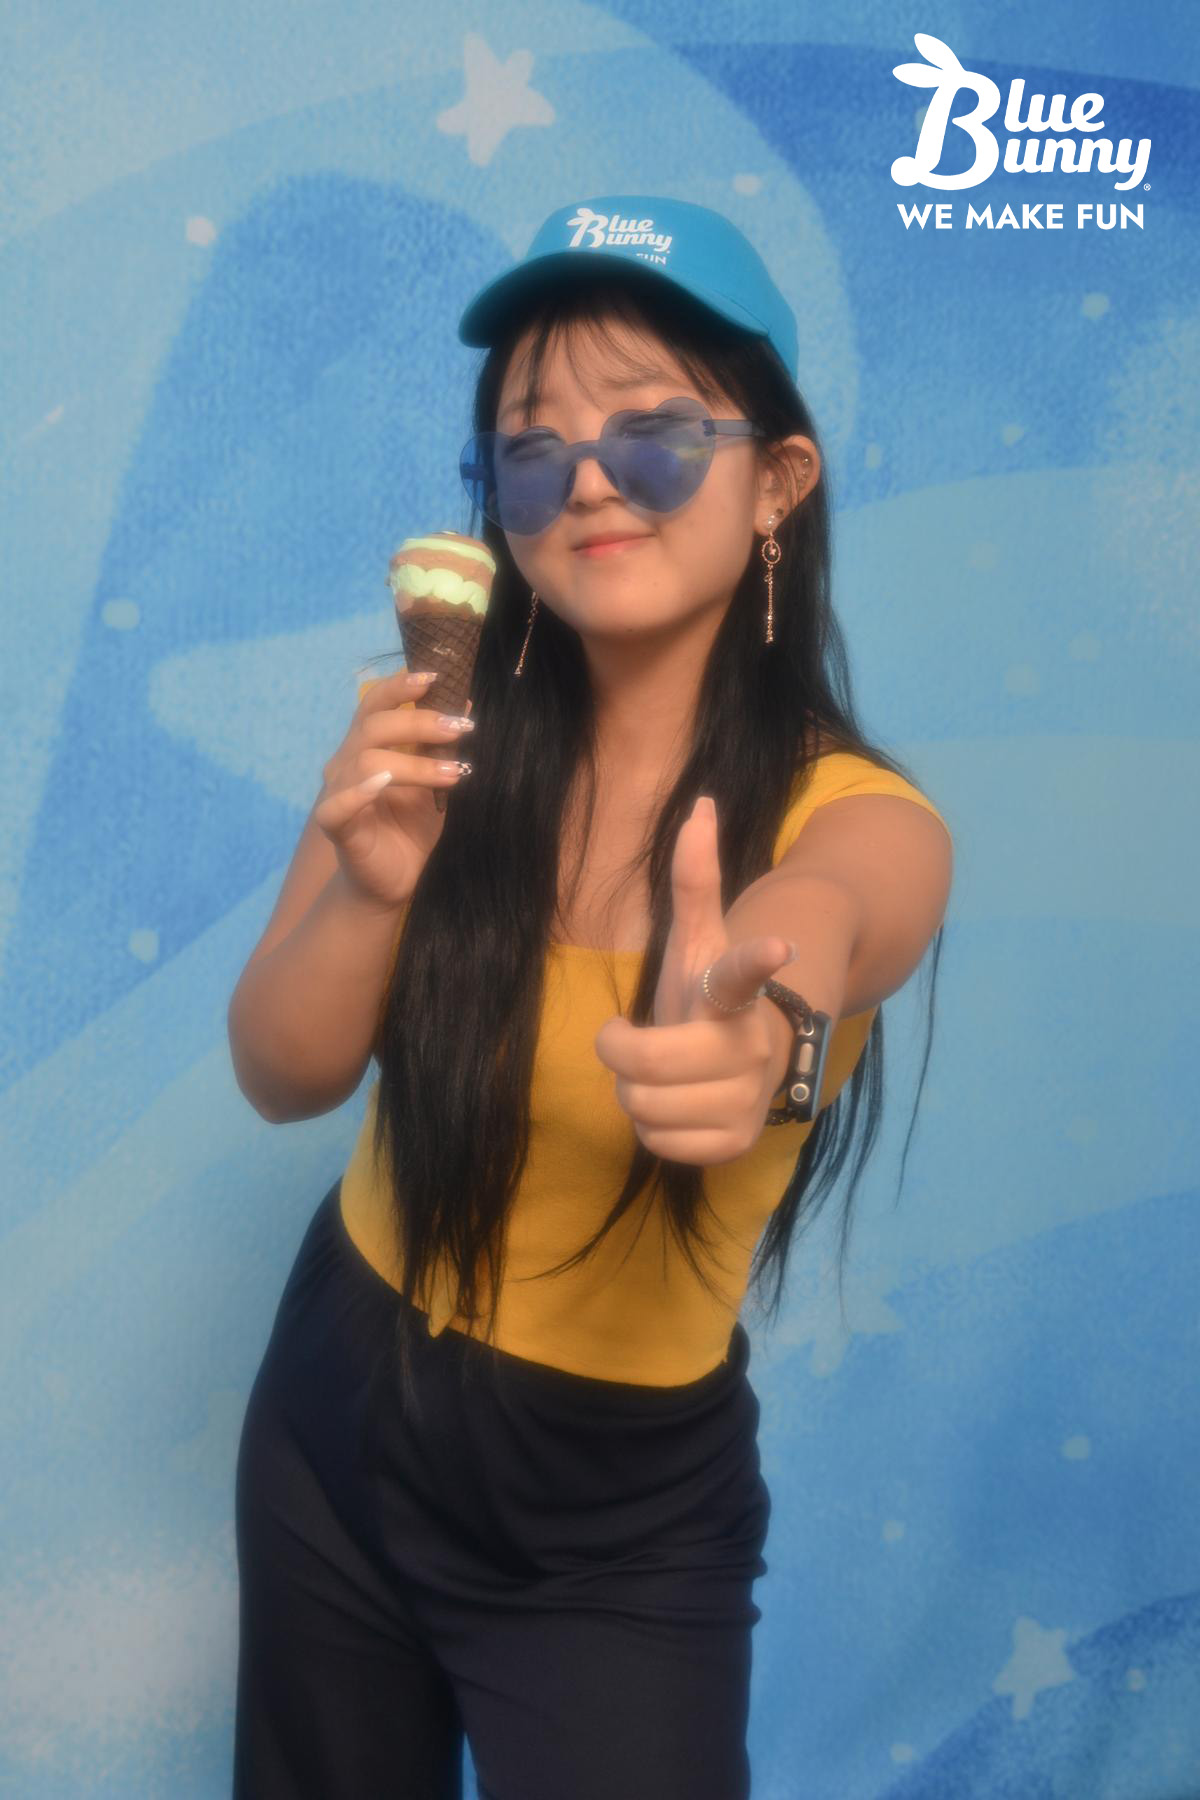 Girl pointing at the camera holding a twist cone